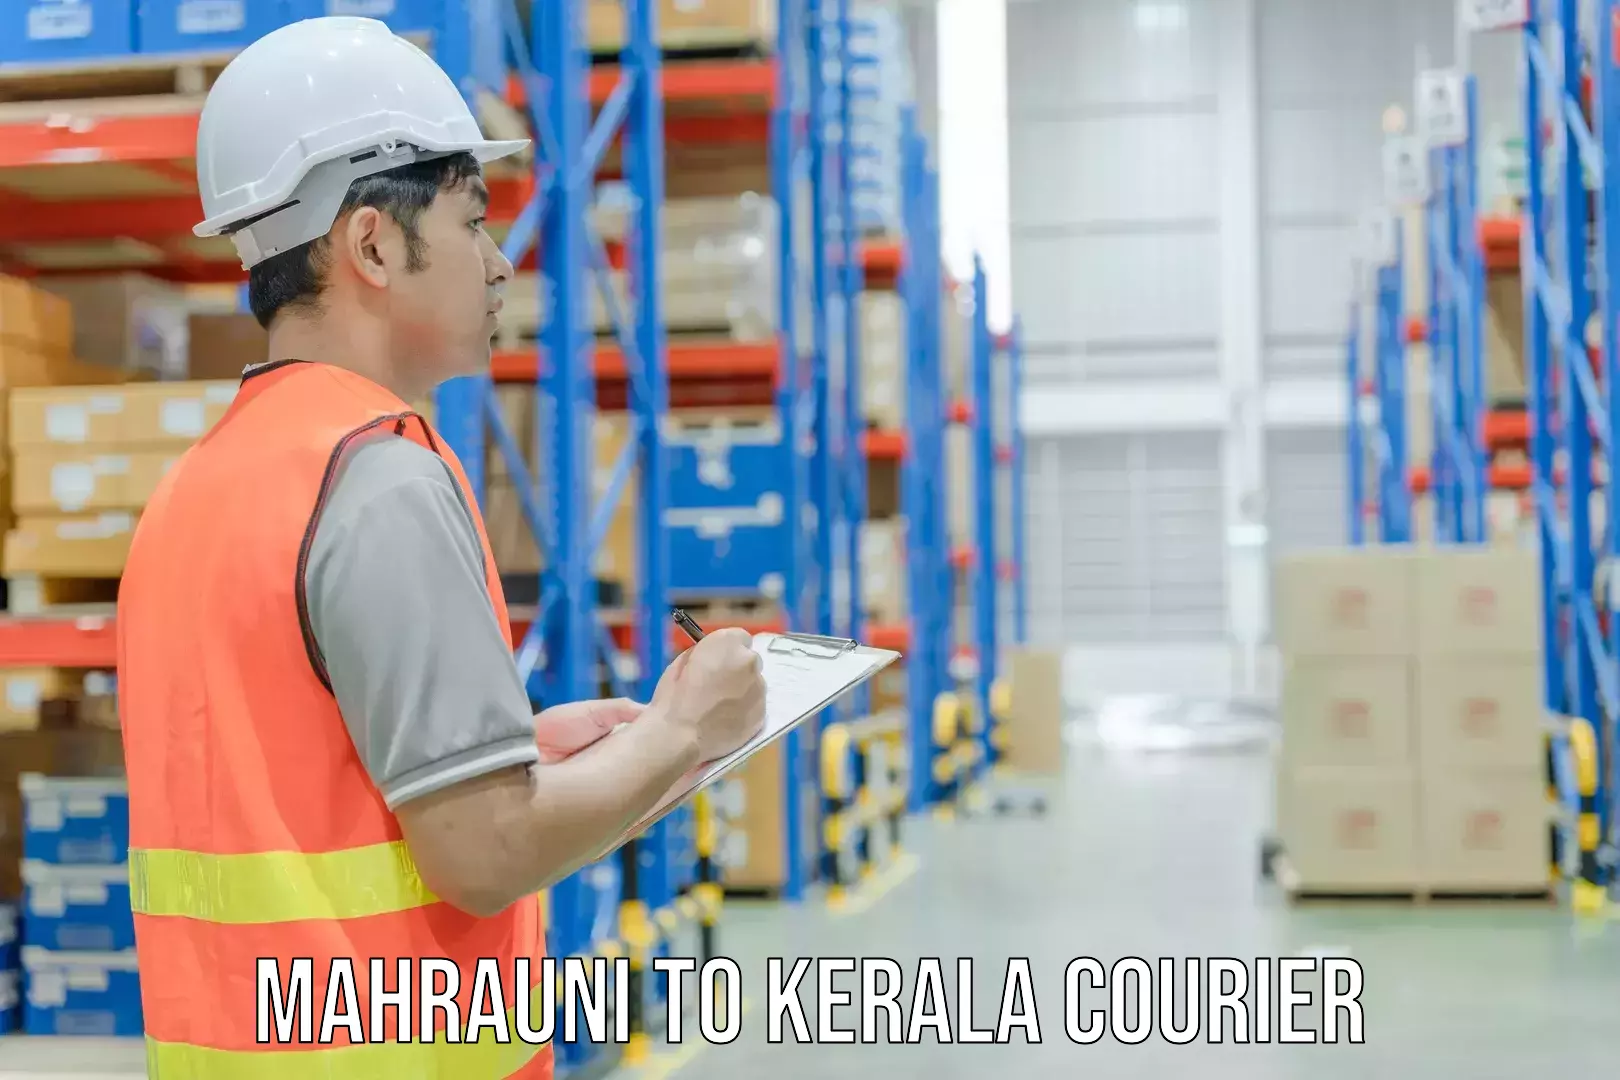 Urban courier service Mahrauni to Cochin University of Science and Technology